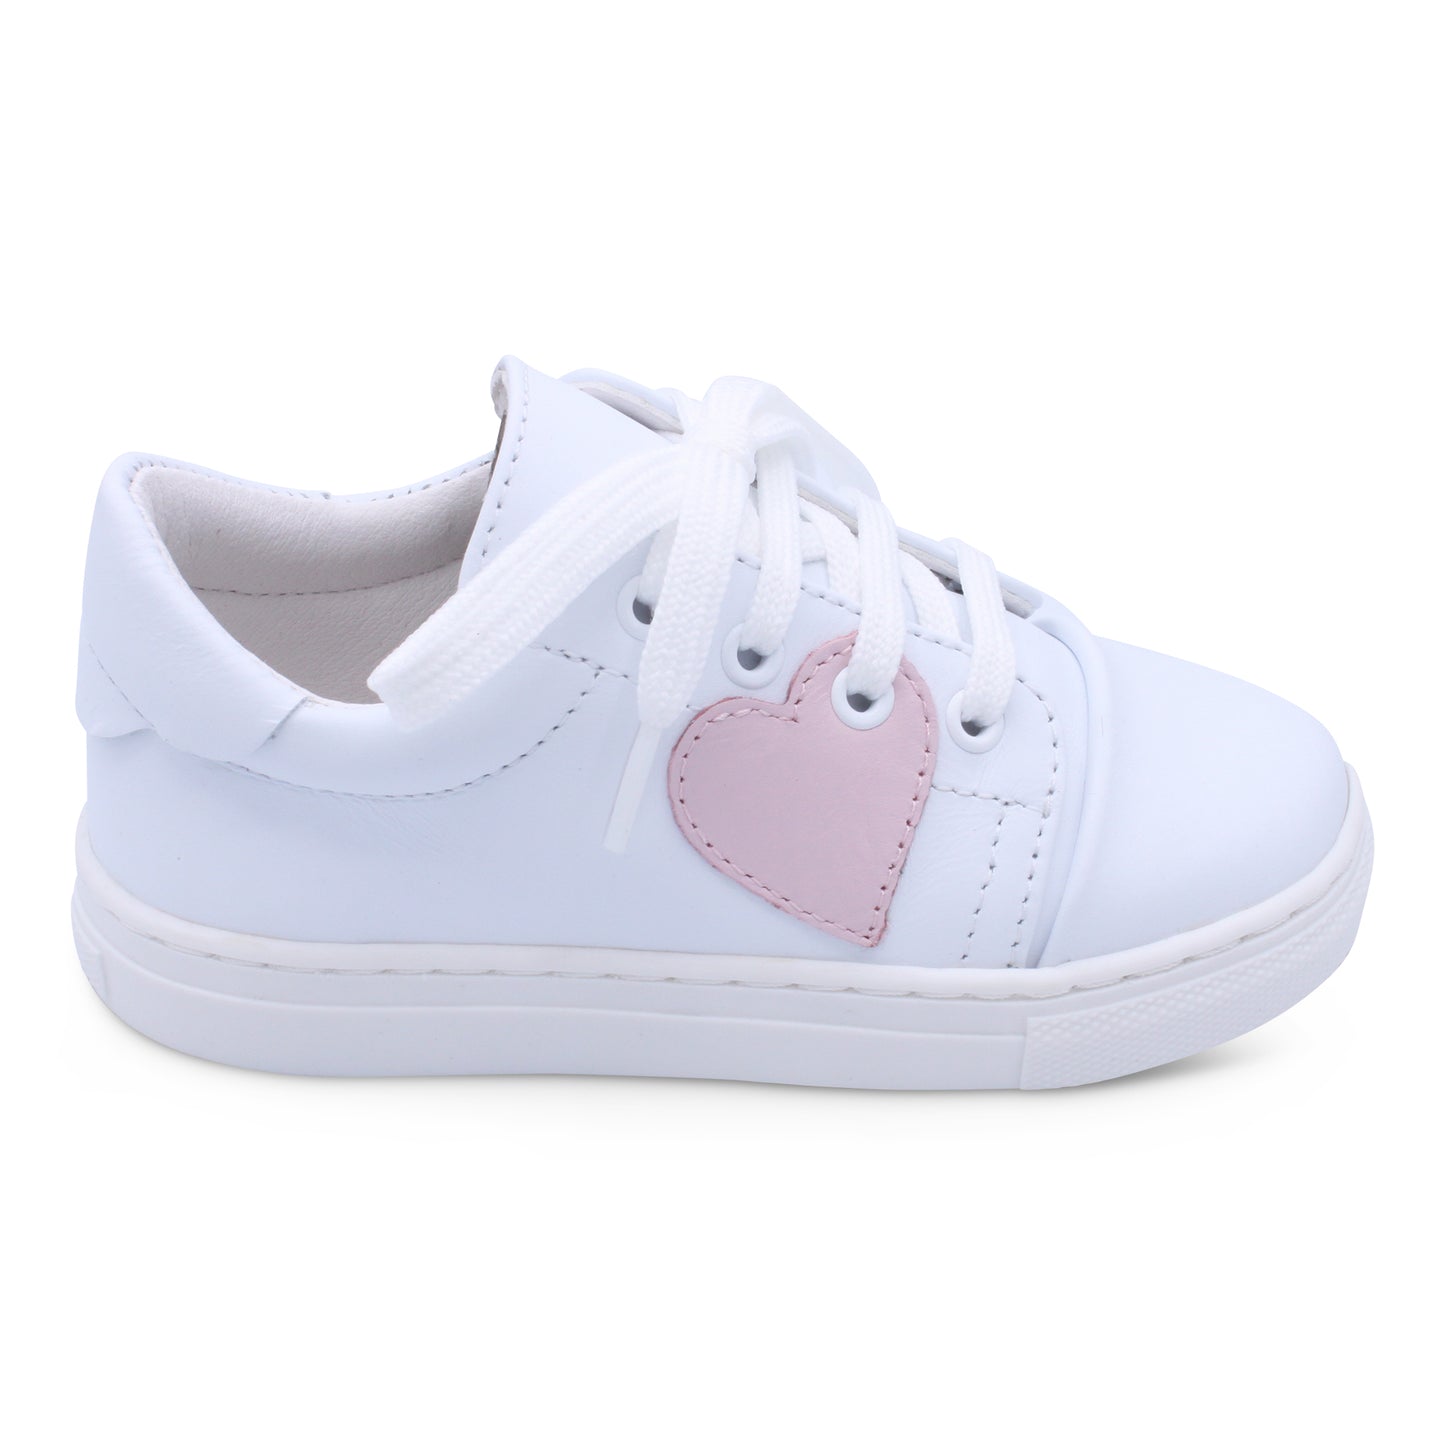 Borbeleta-Santina Girls Leather Lace Trainer with Heart Detail